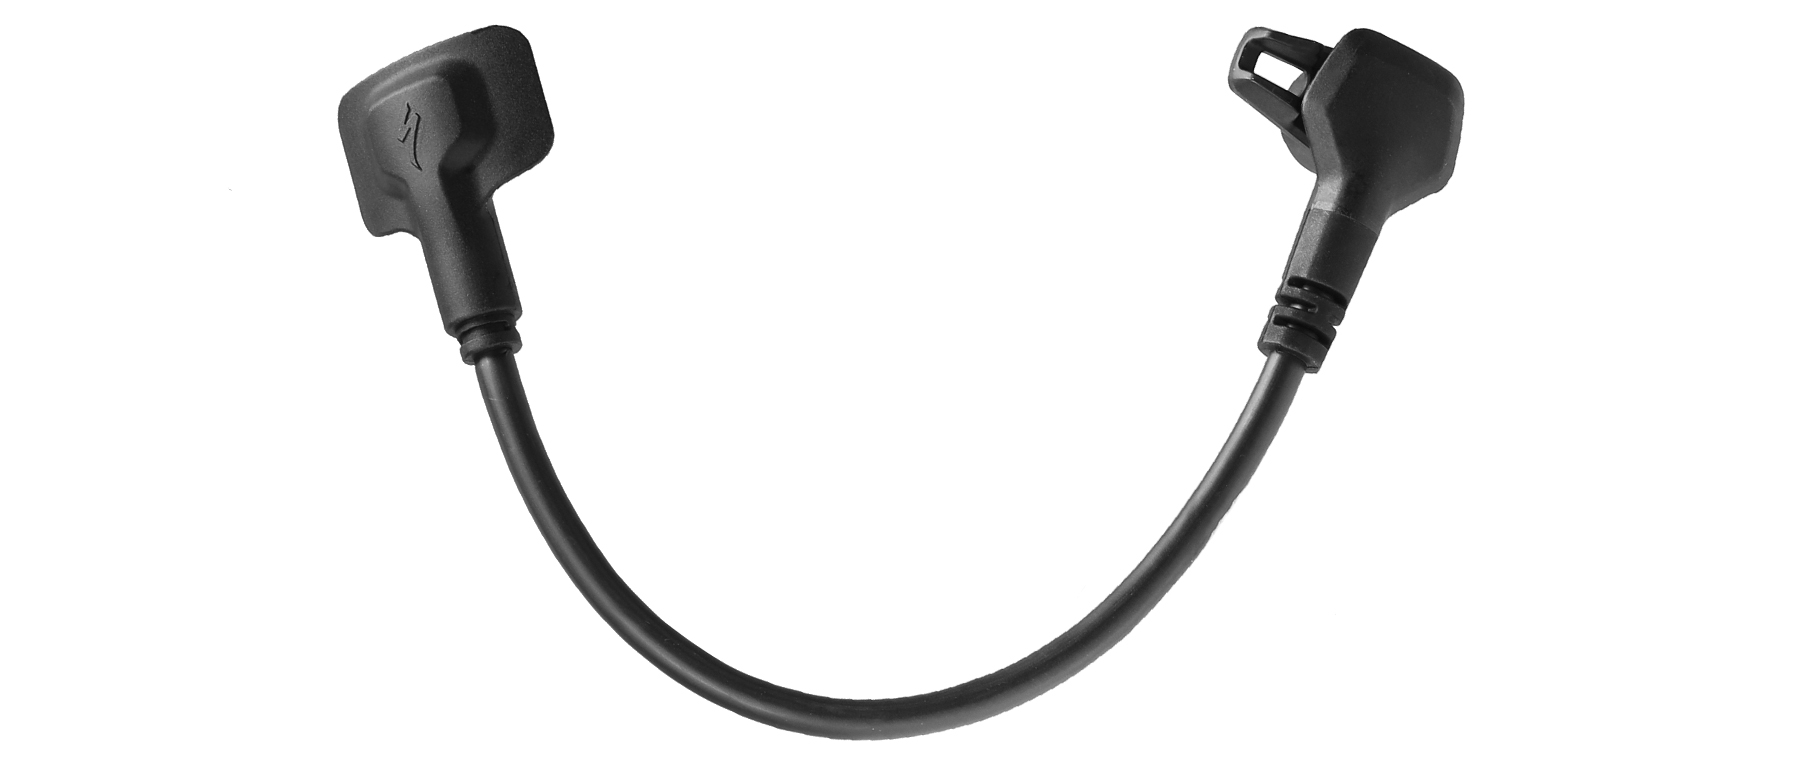 Specialized SL Range Extender Battery Cable